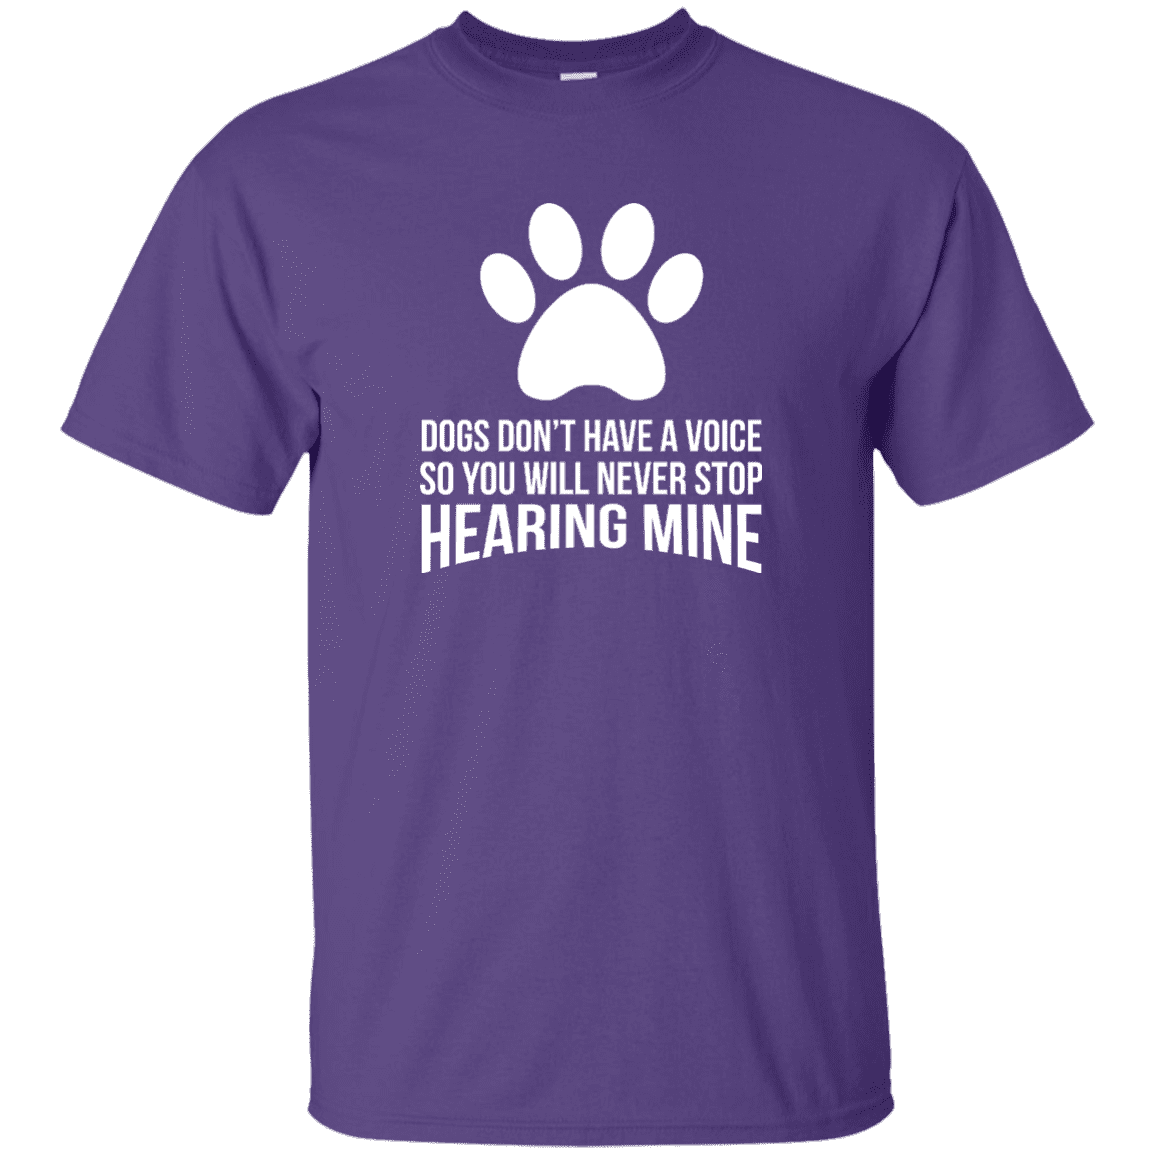 Dogs Don't Have A Voice - T Shirt.